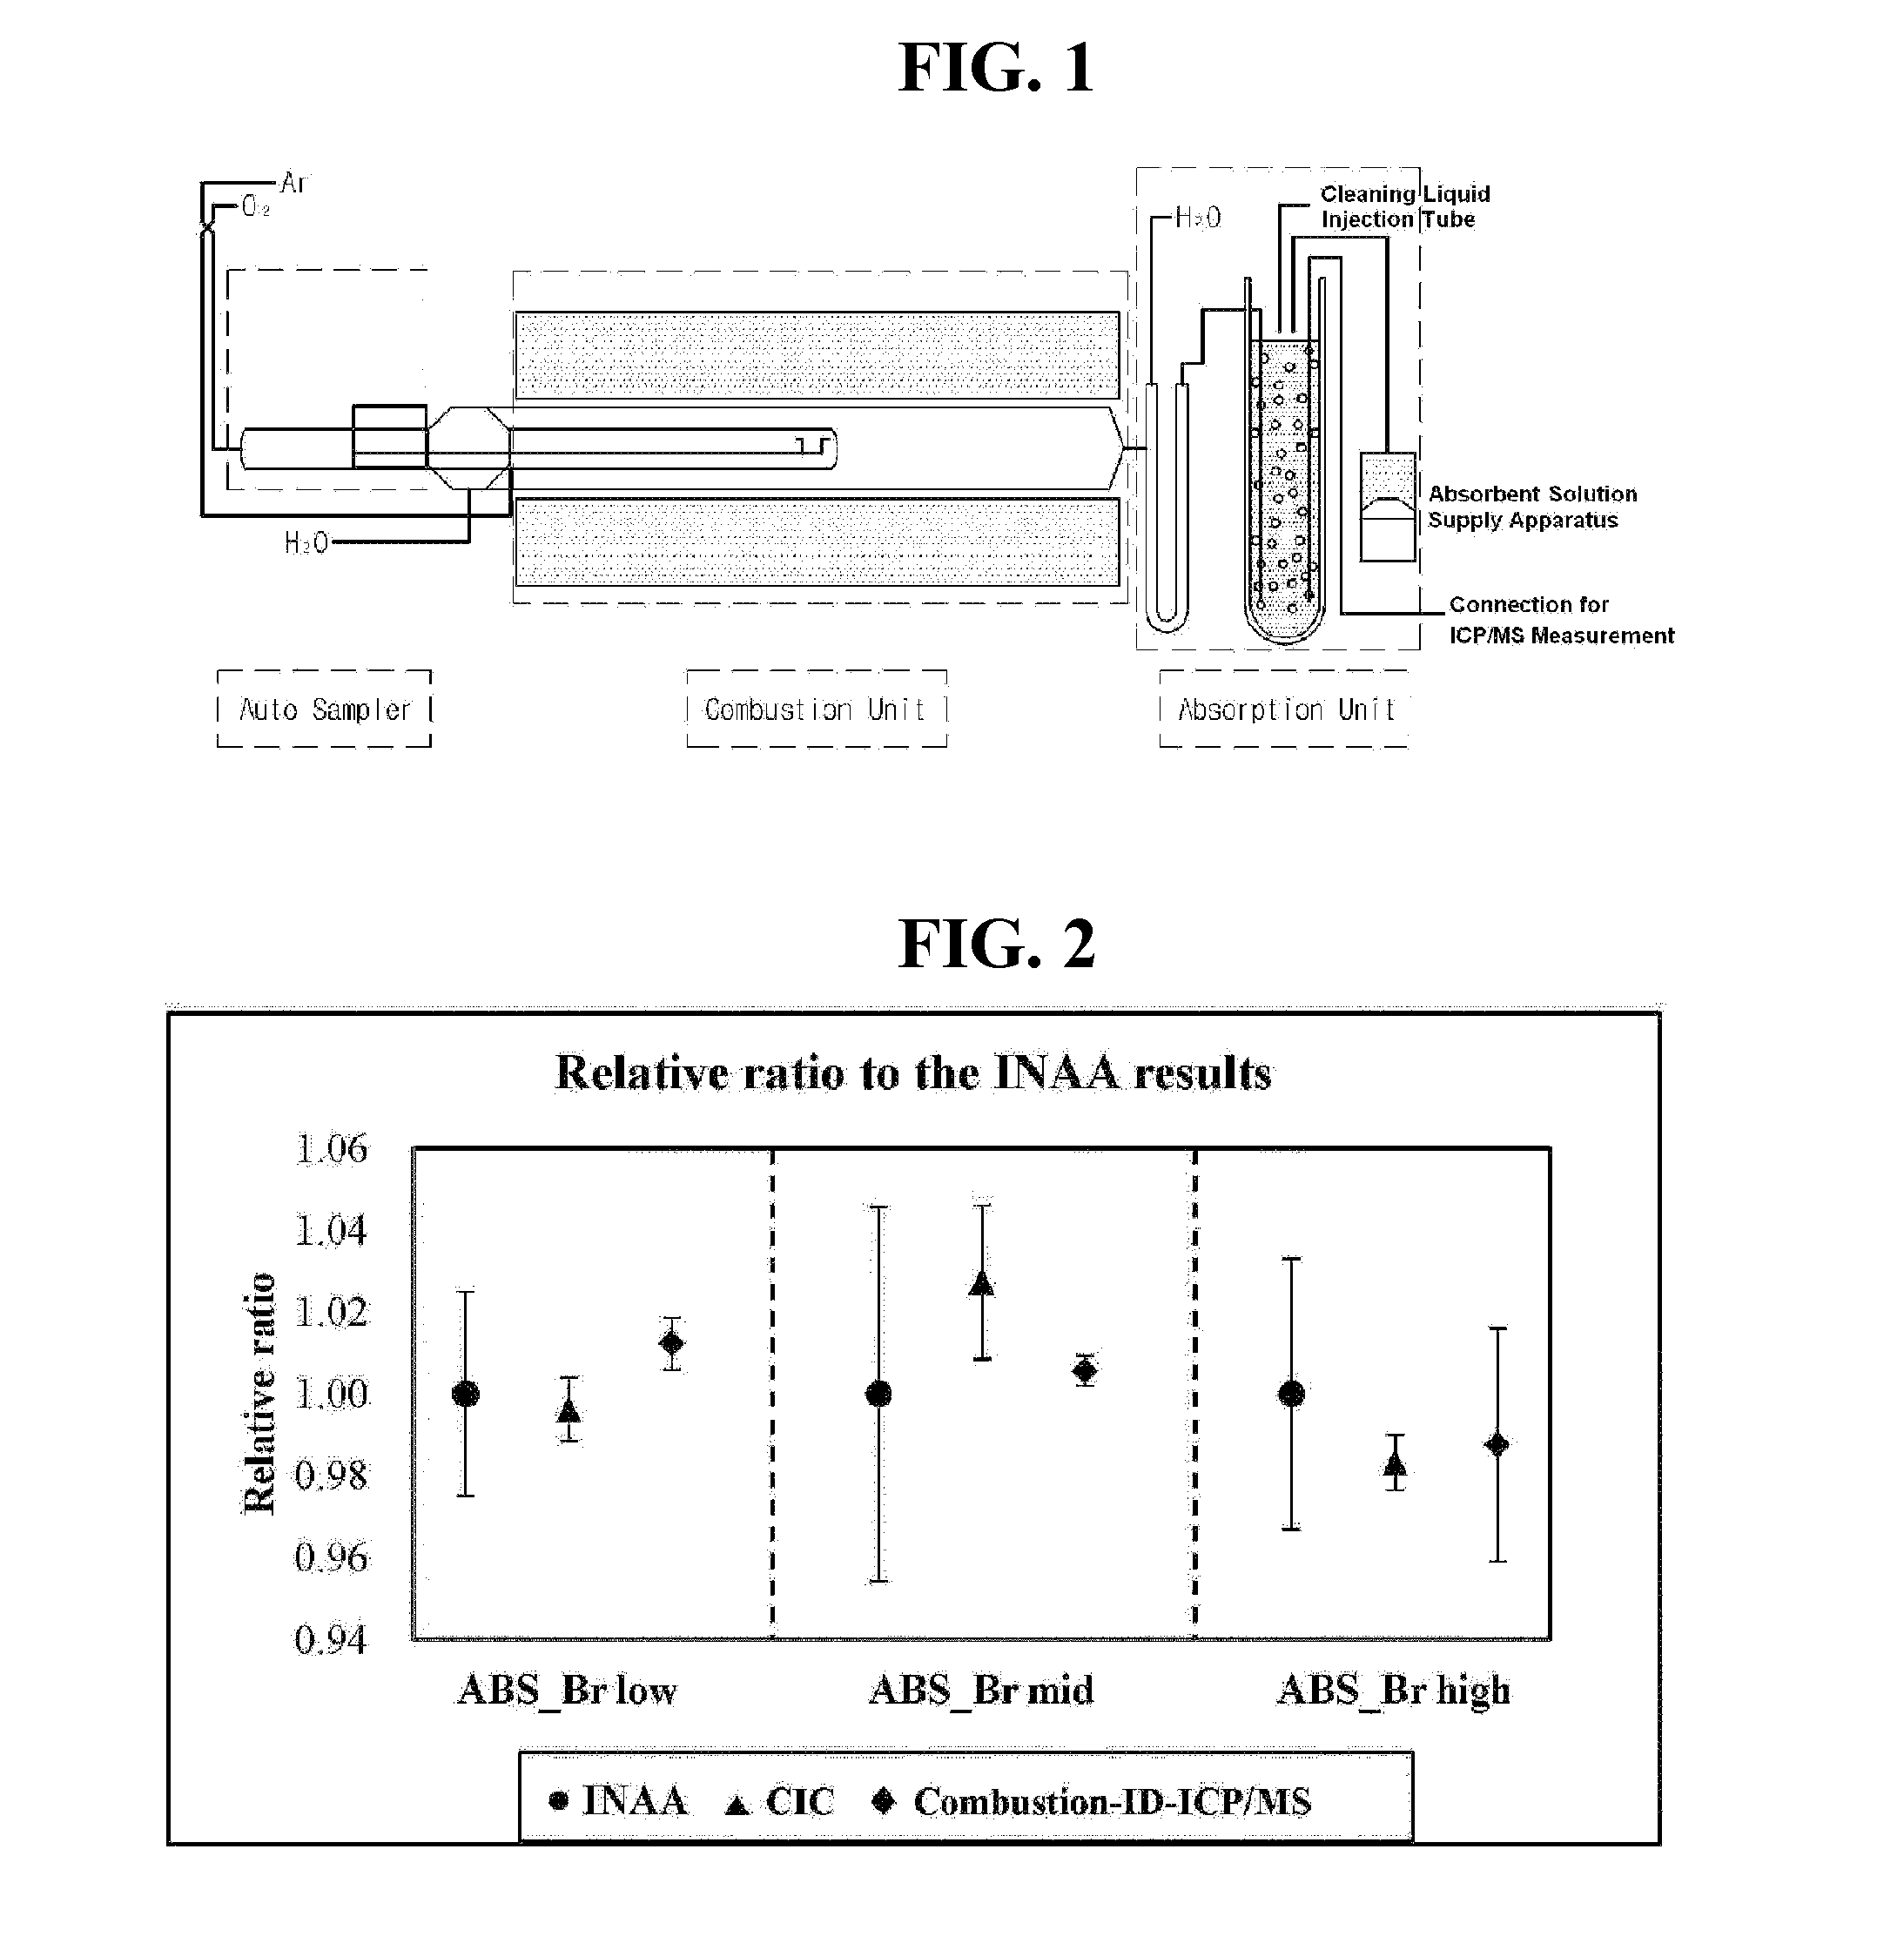 Combustion pretreatment-isotope dilution mass spectrometry